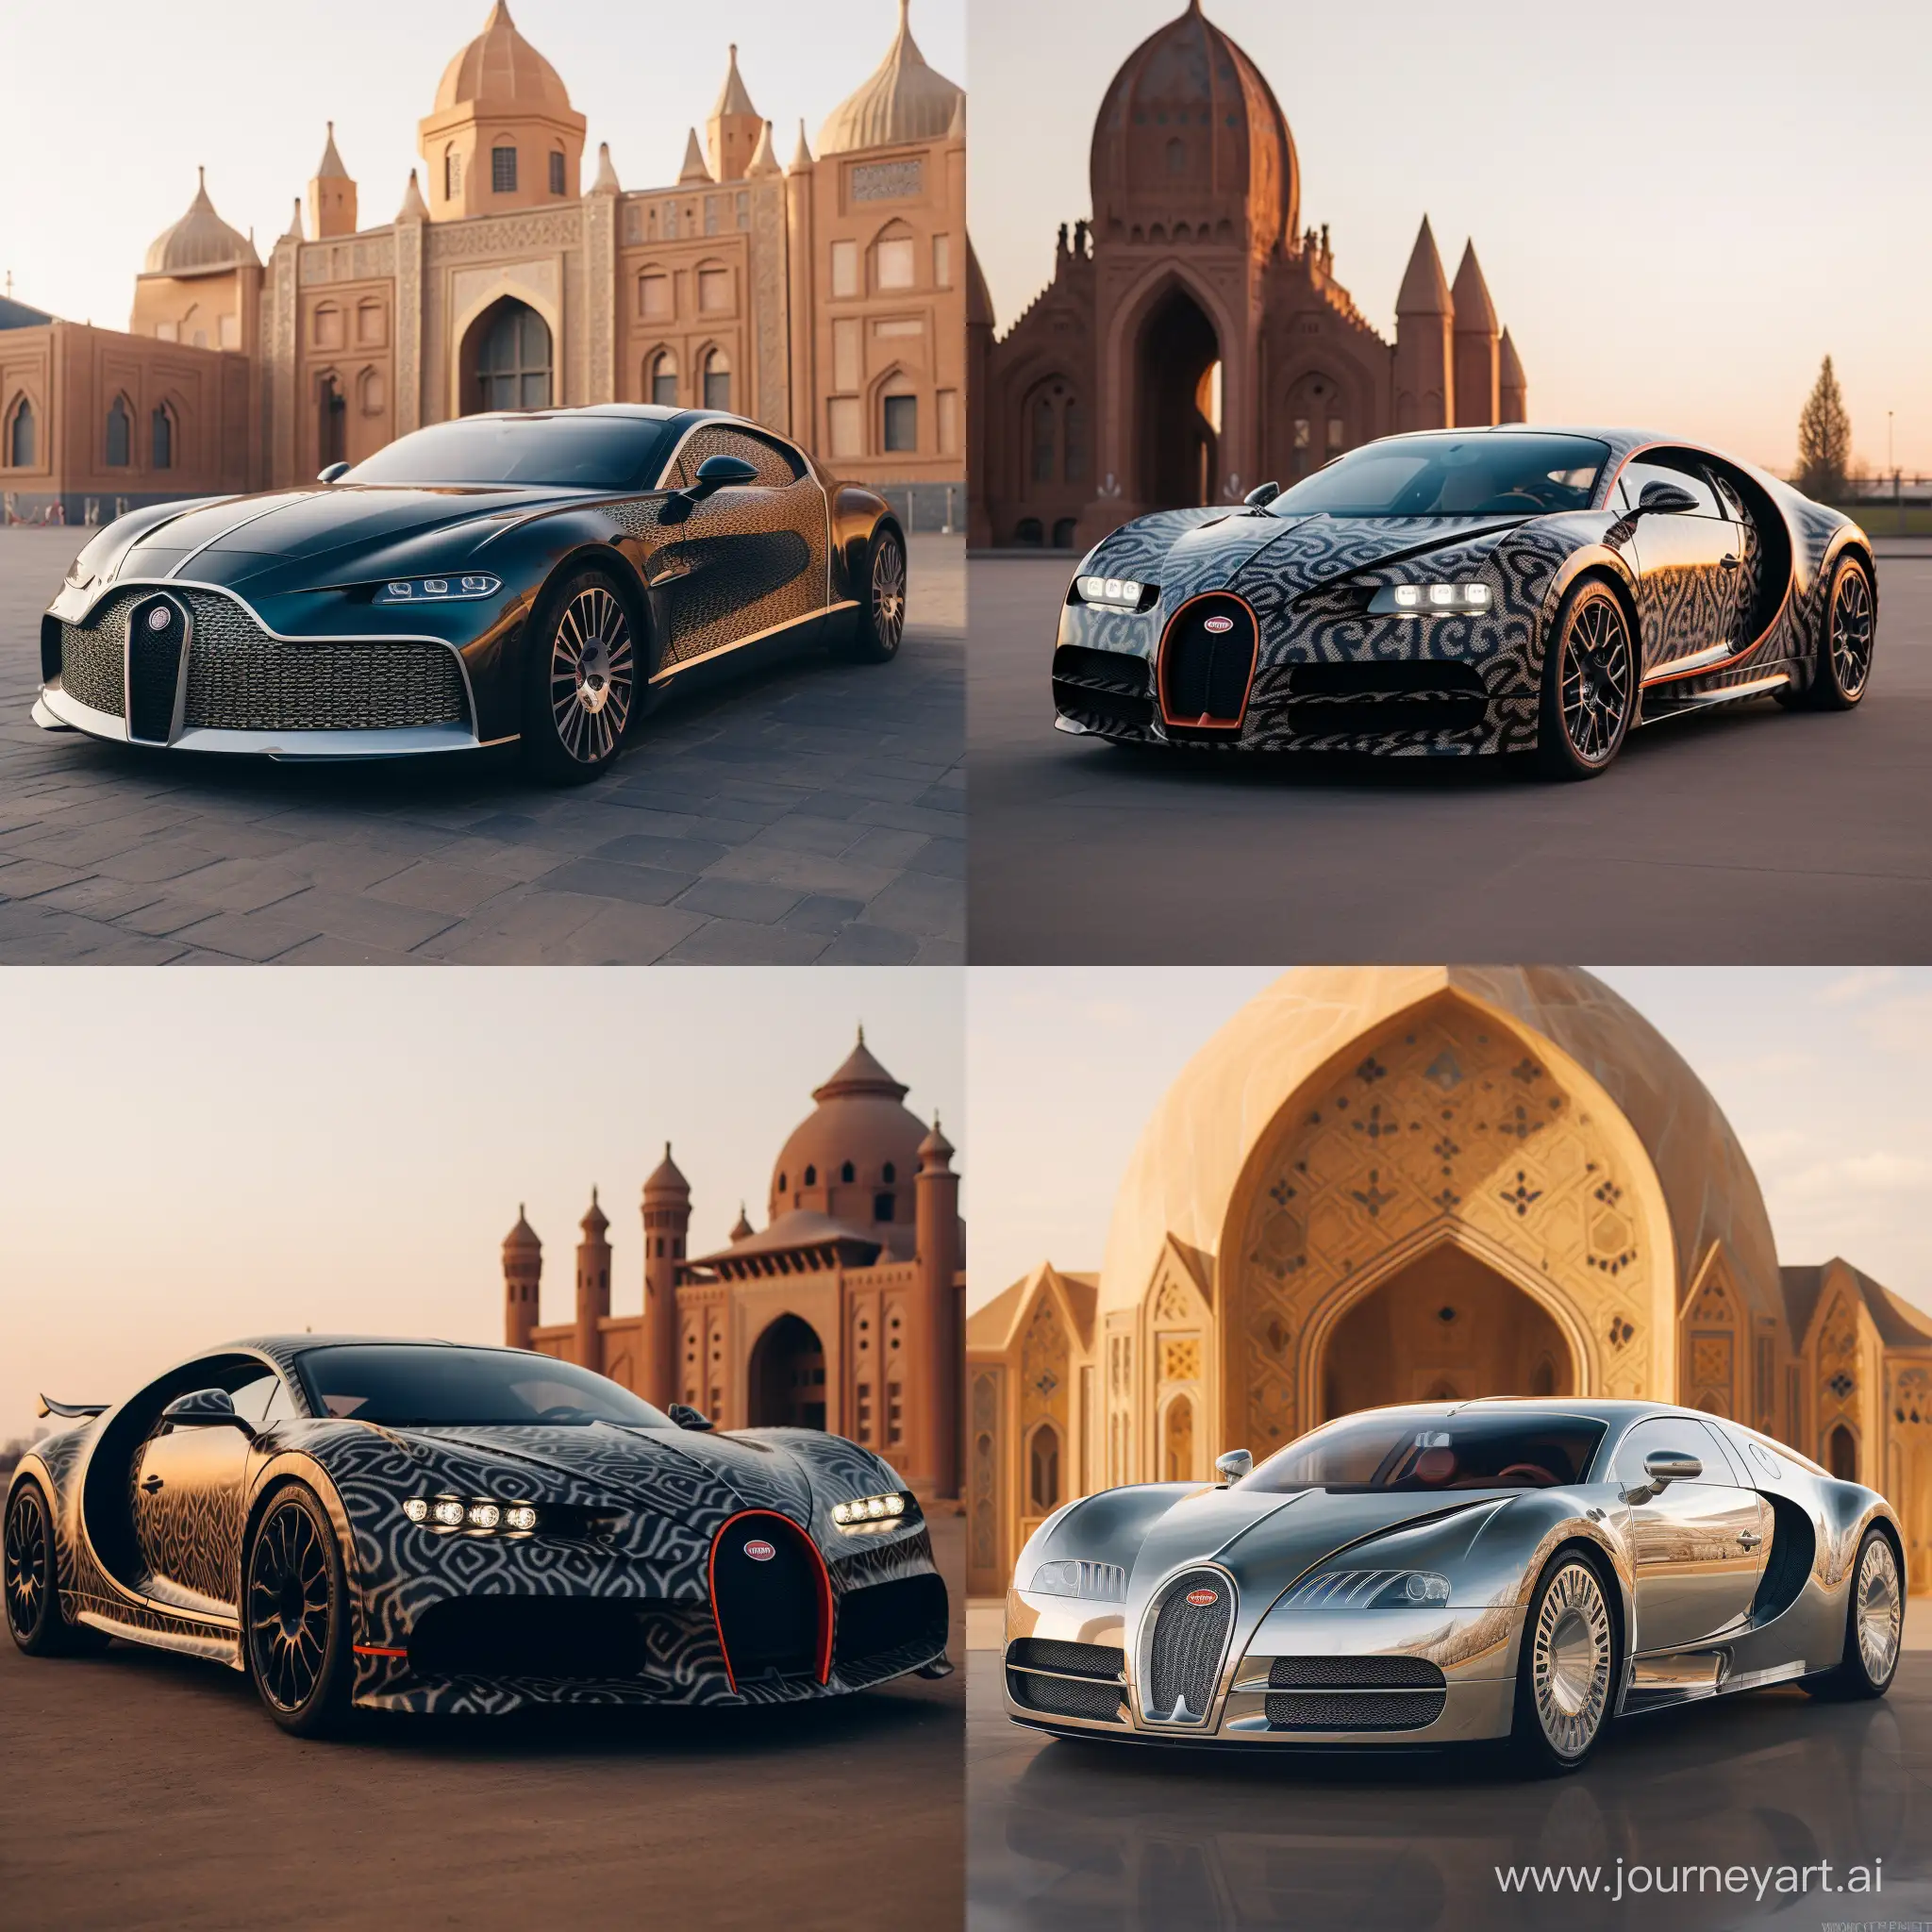 A Bugatti with the design of Isfahan mosques